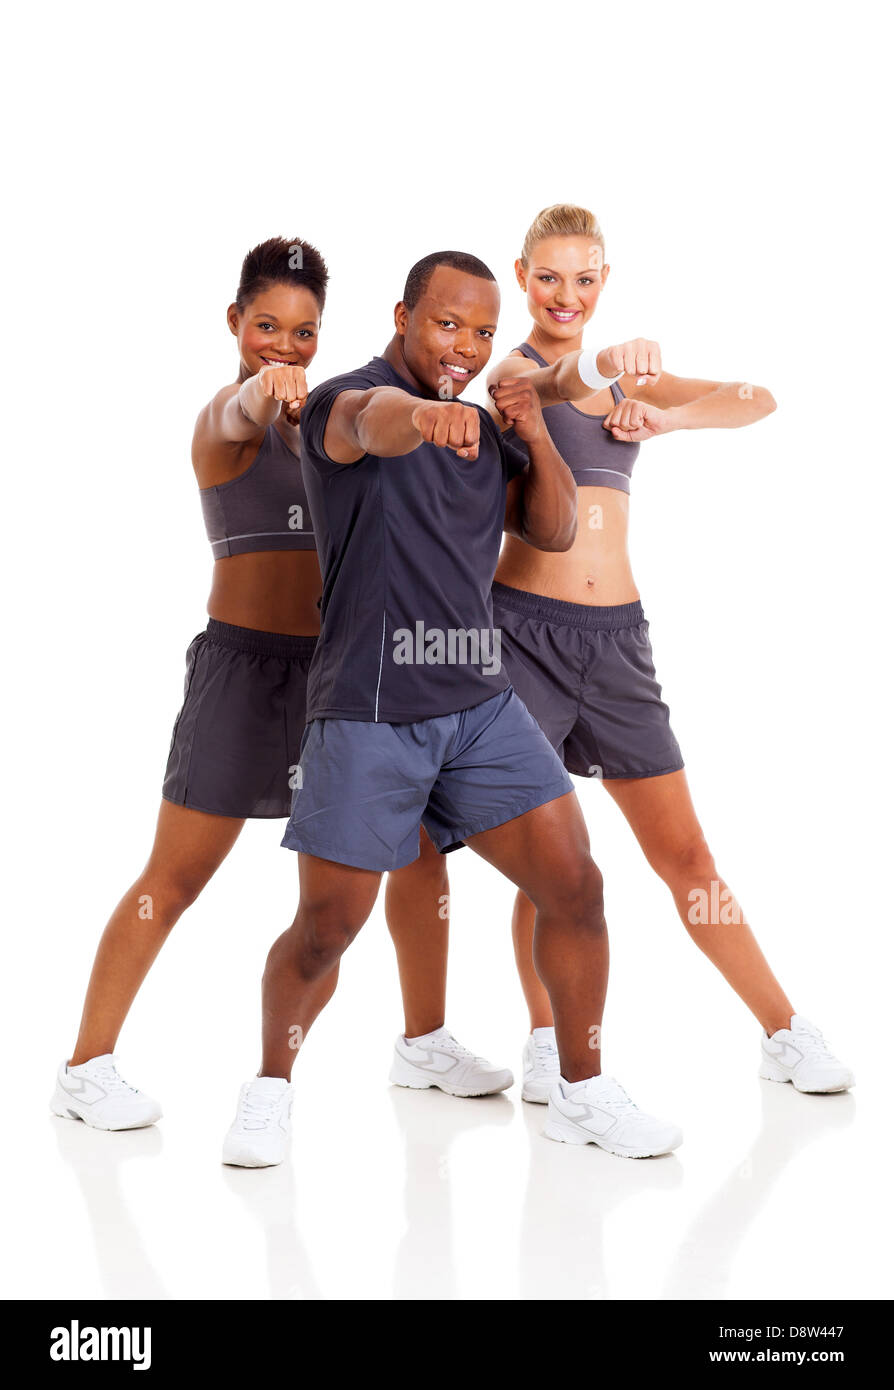 group of fit young adult working out on white background Stock Photo